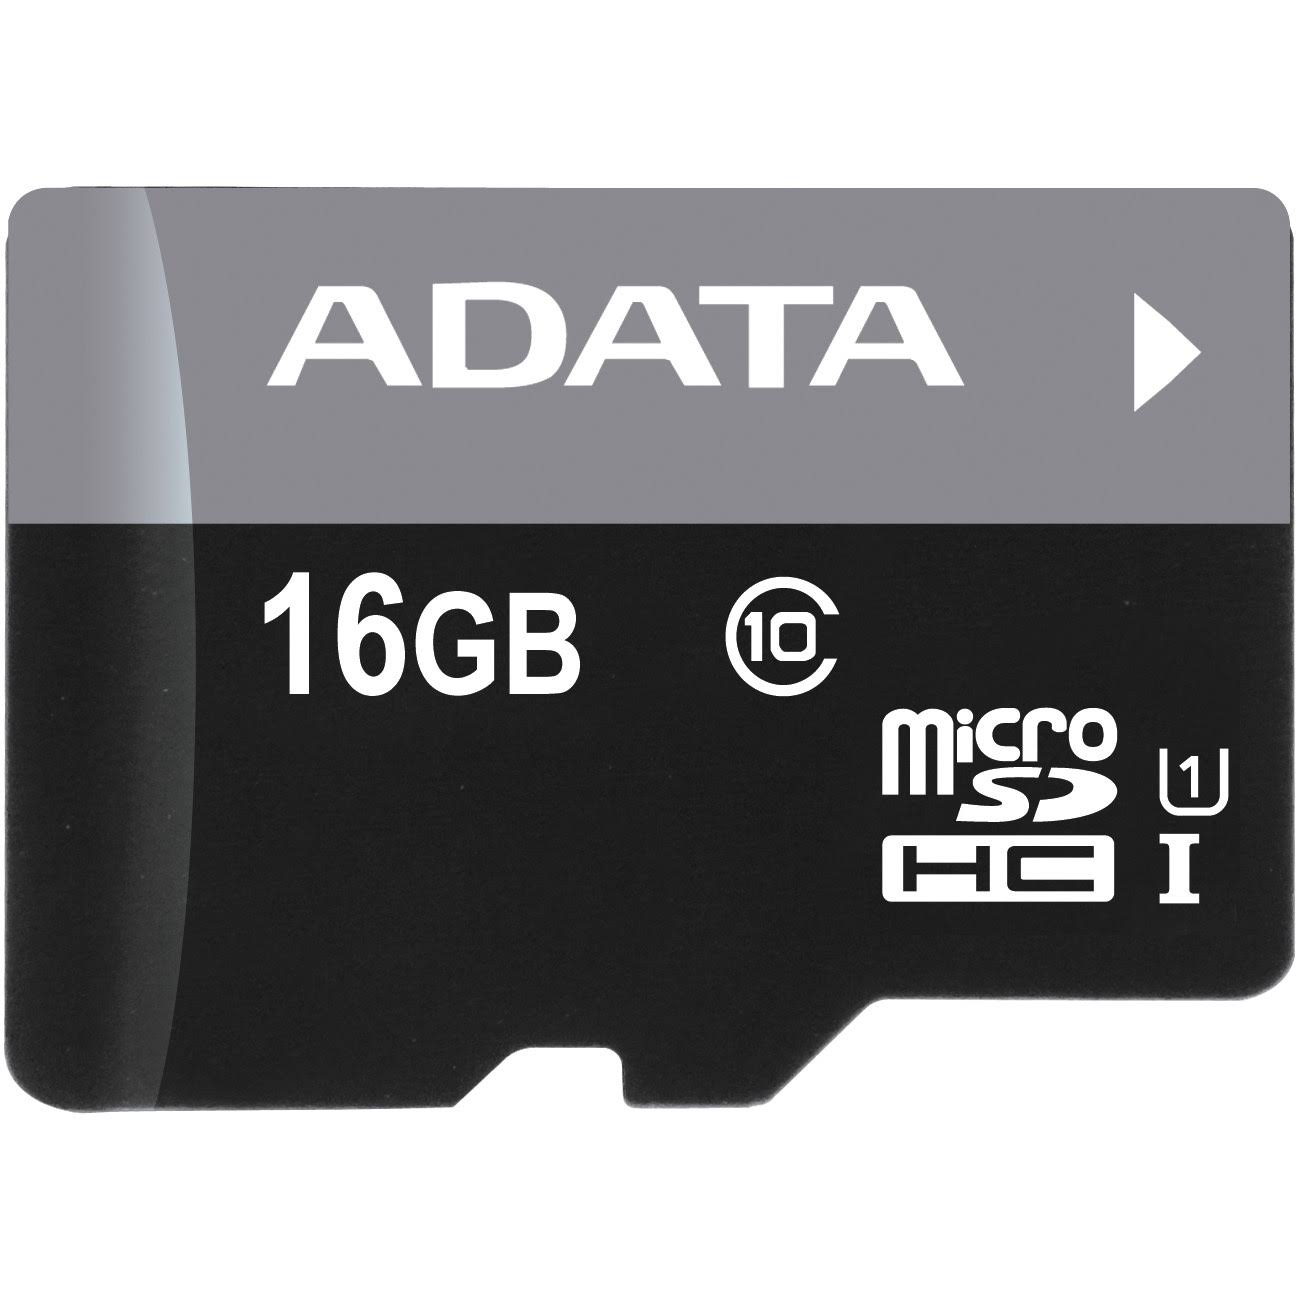 Adata Premier Microsdhc Memory Card - 16gb, With Adapter,Uhs 1,Class 10